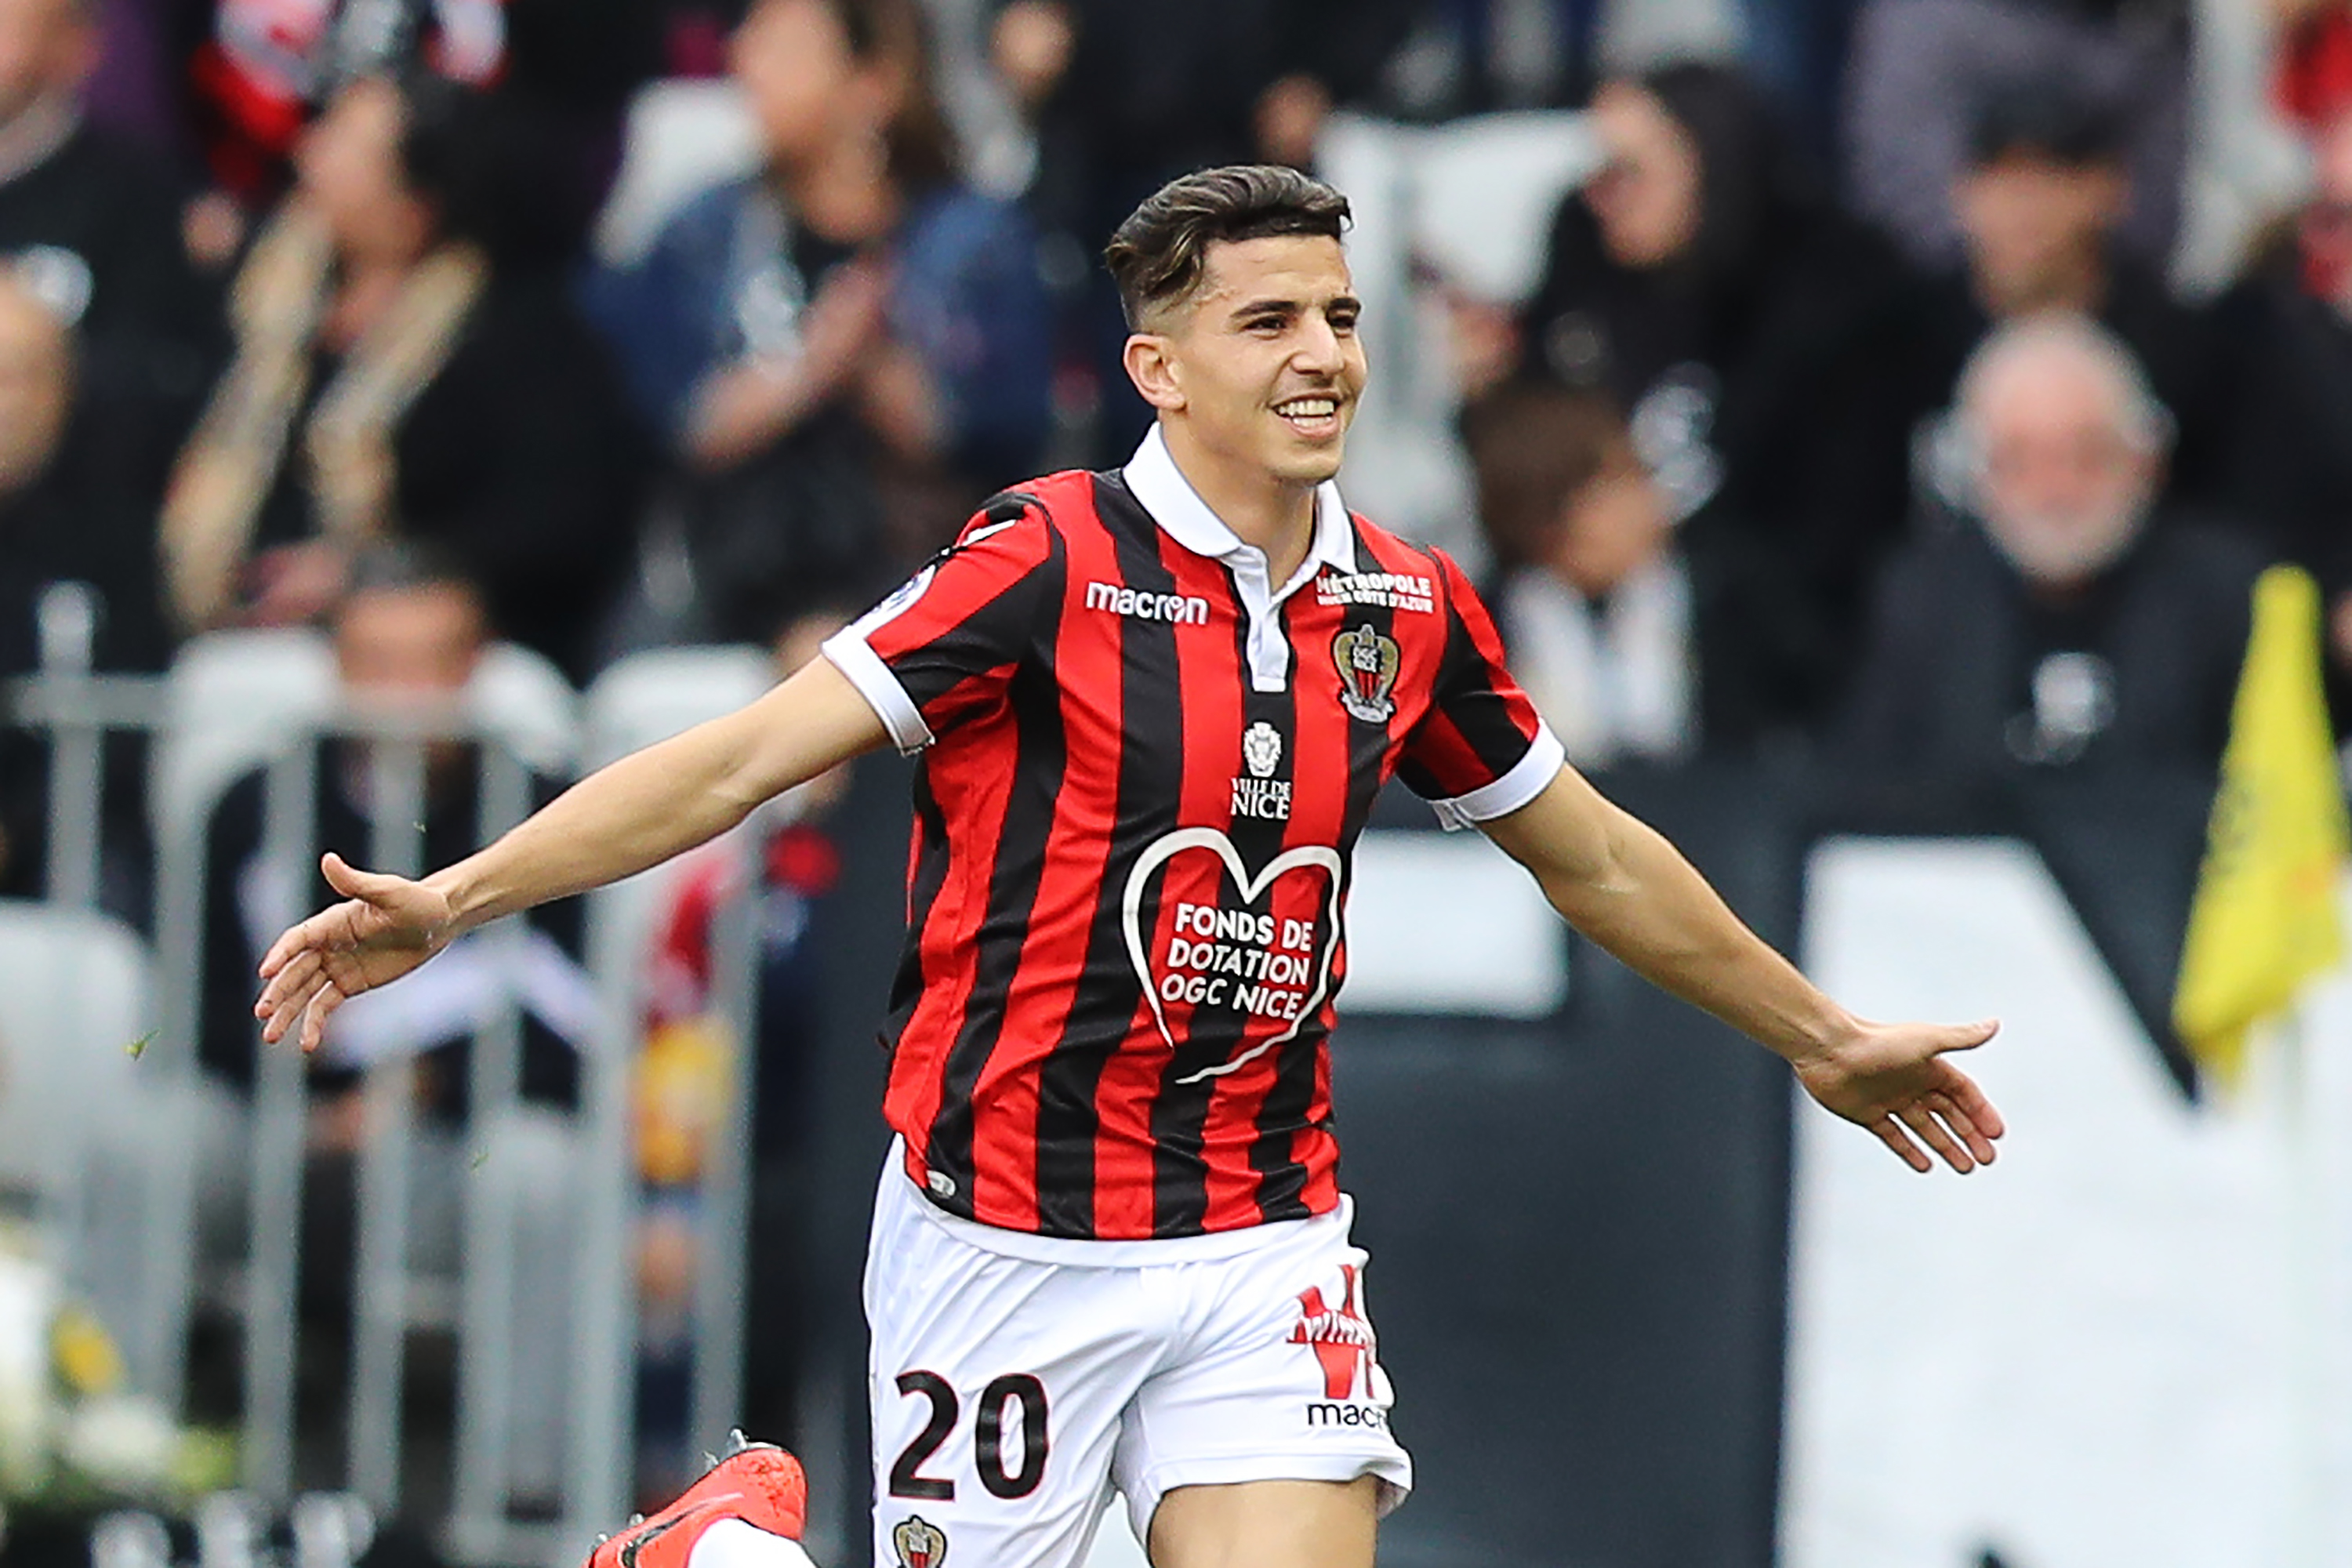 Nice's Algerian defender Youcef Atal celebrates afte scoring a goal during the French L1 football match between Nice (OGCN) and Strasbourg (RCSA) on March 3, 2019, at the Allianz Riviera stadium in Nice, southeastern France. (Photo by VALERY HACHE / AFP)        (Photo credit should read VALERY HACHE/AFP/Getty Images)